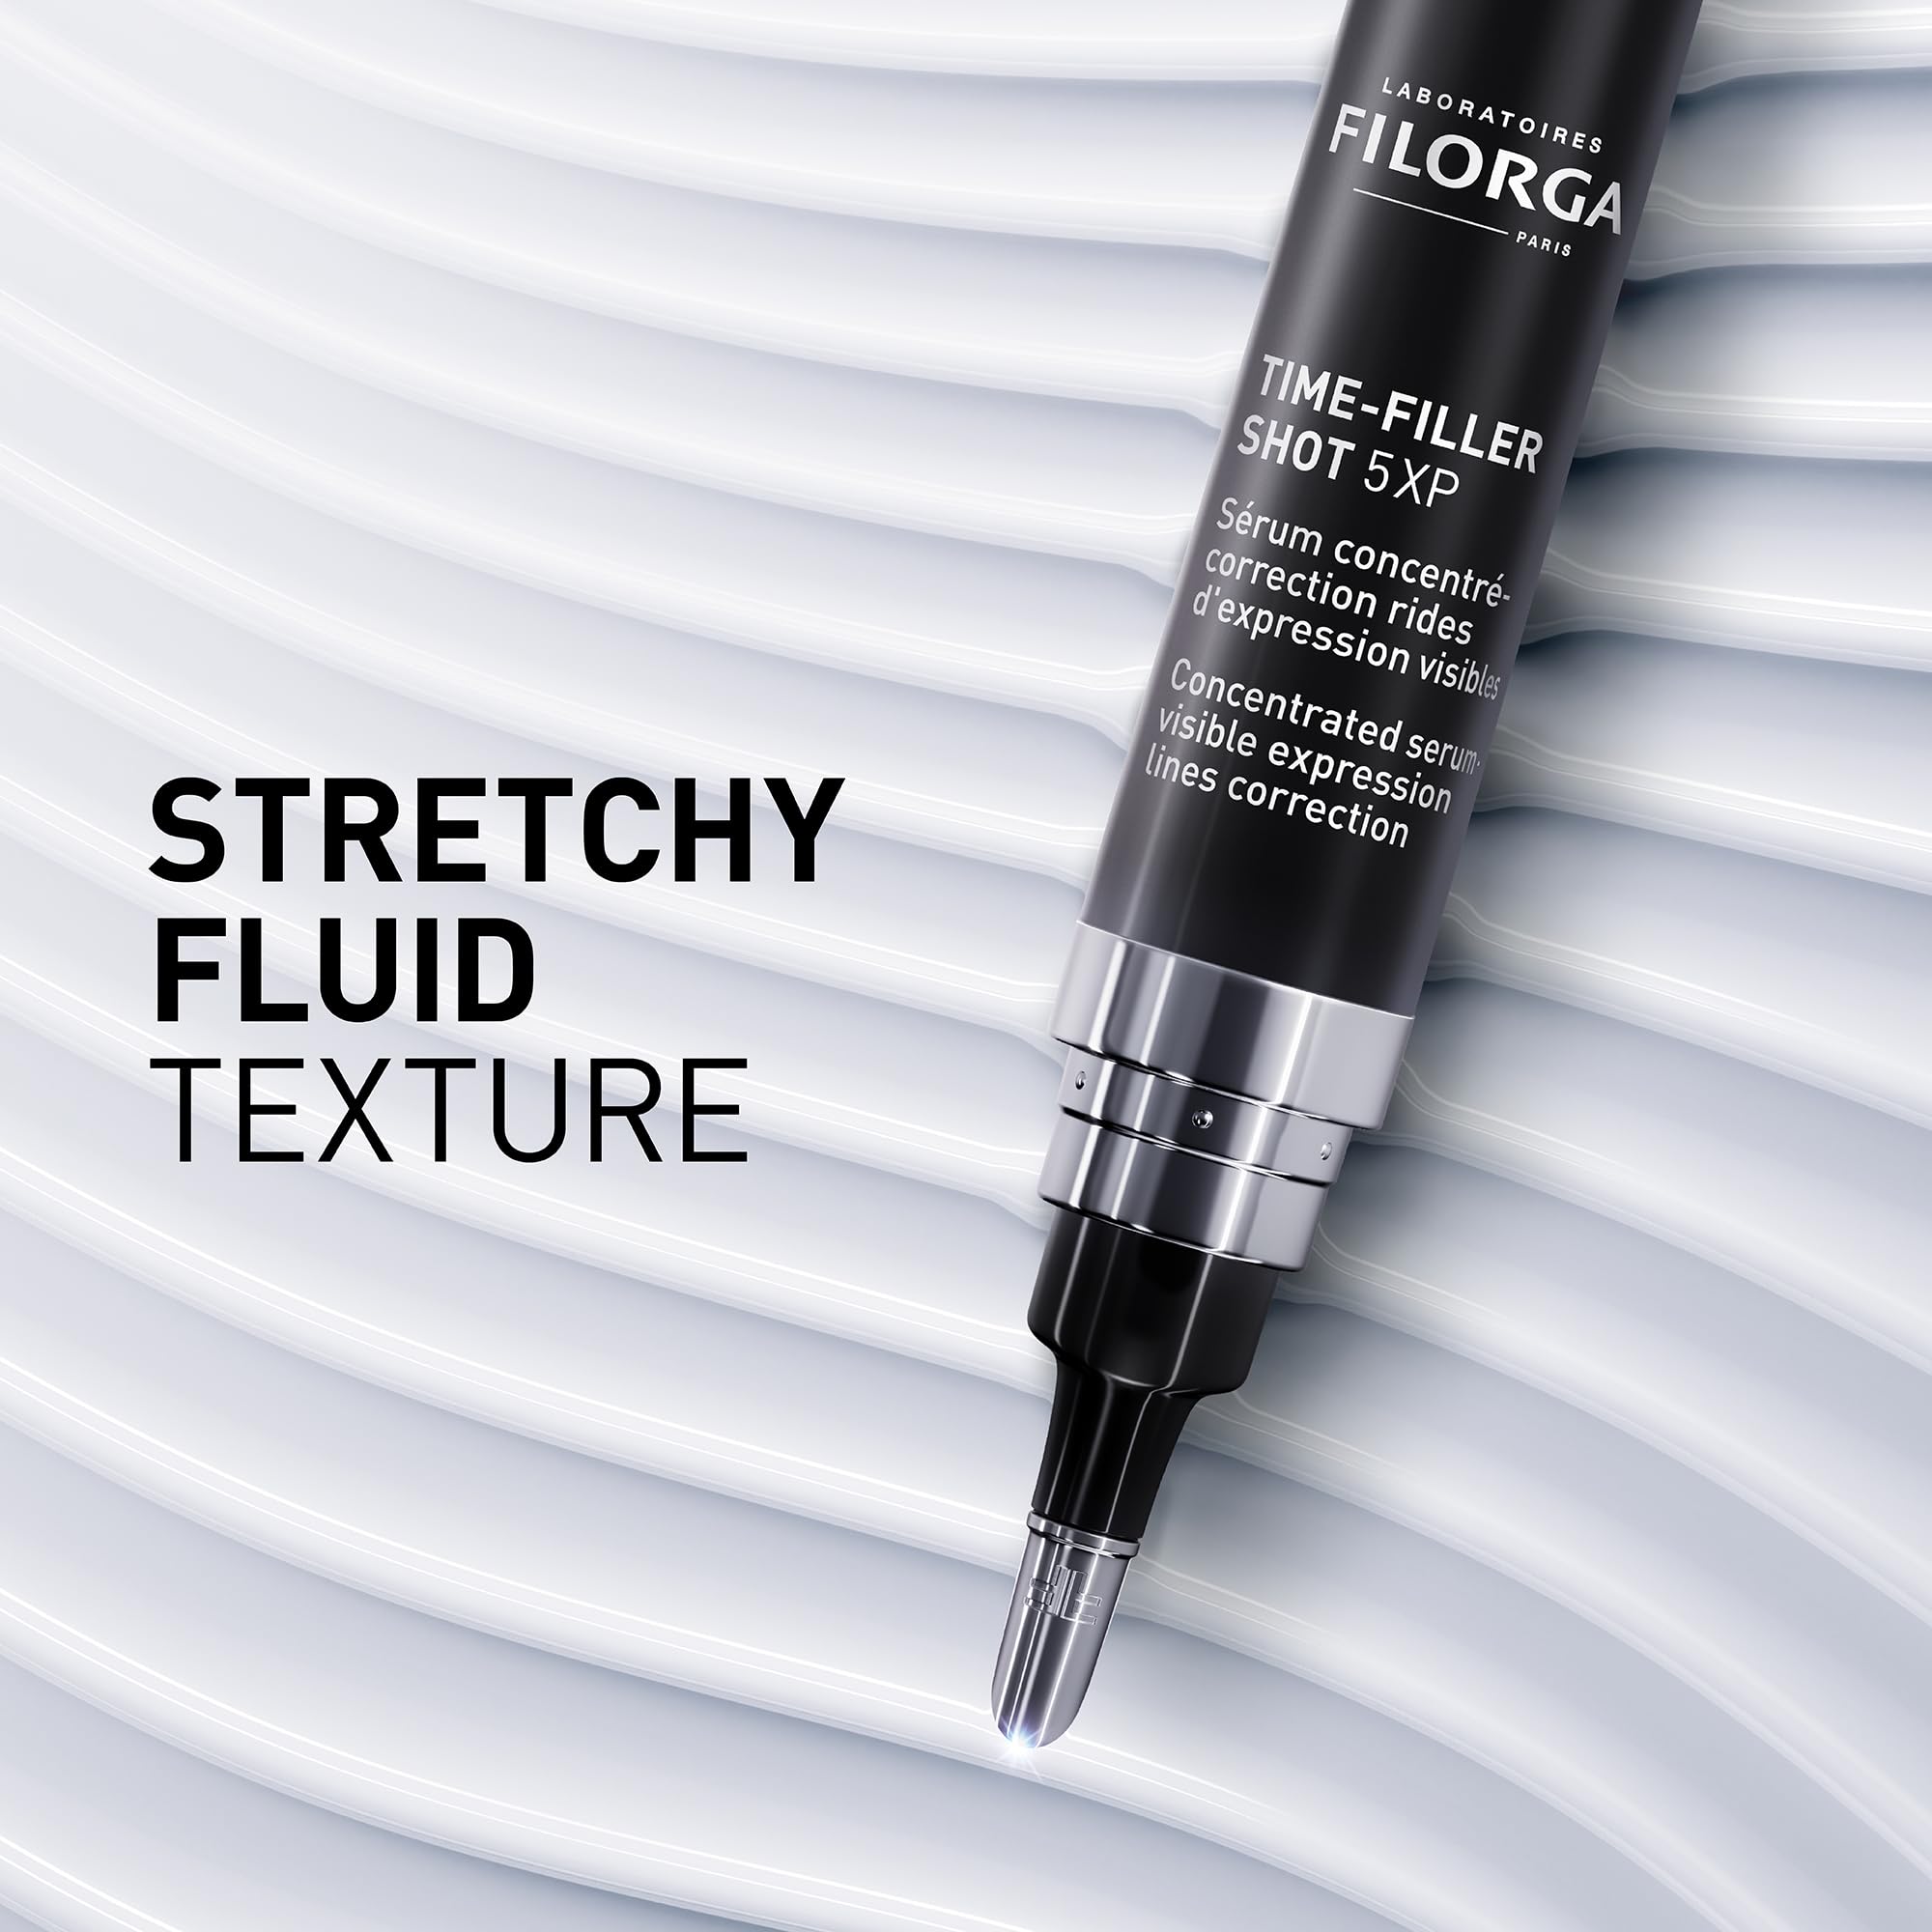 Filorga Time-Filler Shot, A Moisturizing Serum with Neuropeptide Technology & Polysaccharides to Relax Expression Lines, Hydrate, & Firm Skin for Visible Results in 7 Days, 0.5 fl. Oz.